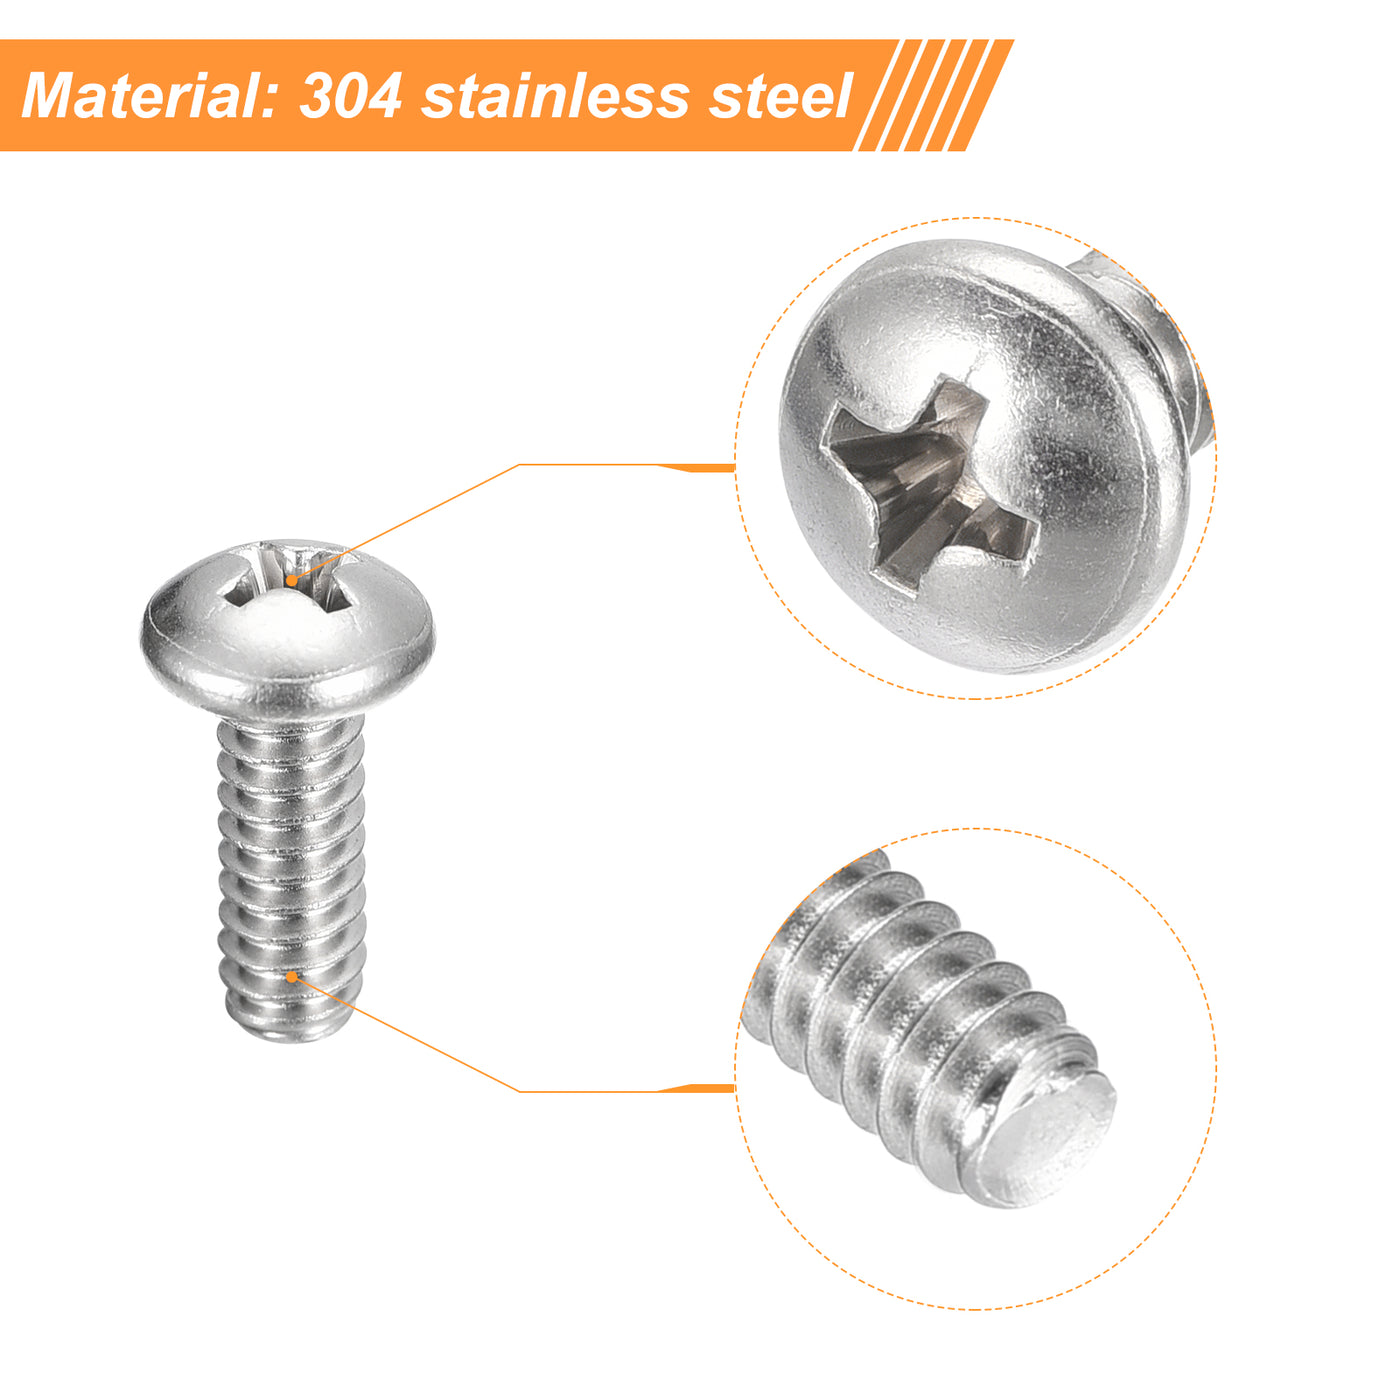 uxcell Uxcell #10-24x1/2" Pan Head Machine Screws, Stainless Steel 18-8 Screw, Pack of 50